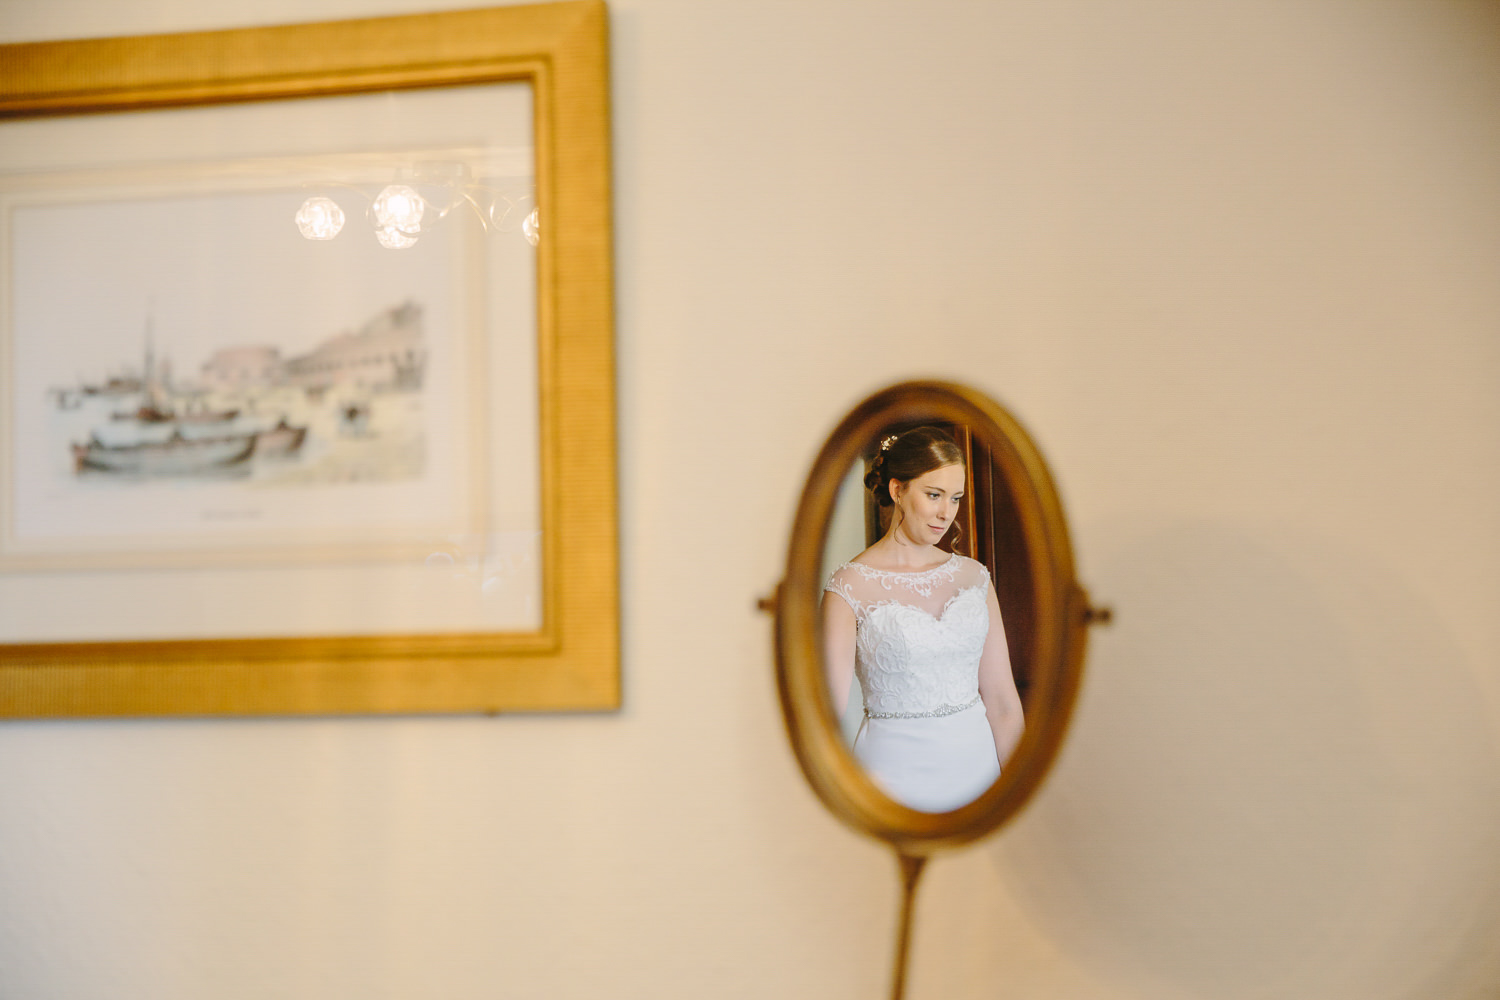 Reflection of bride in small mirror